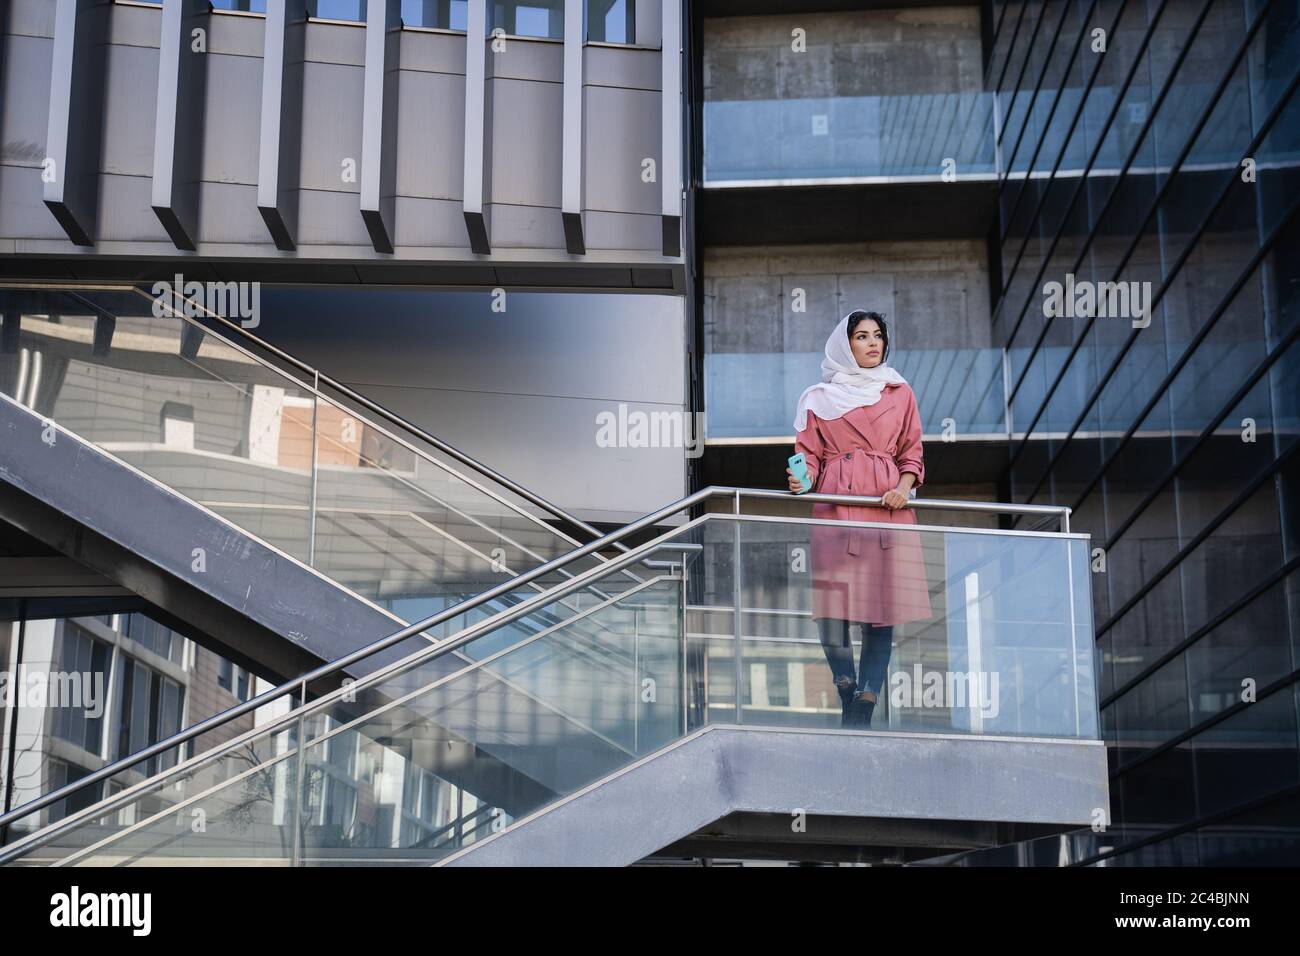 Arab young woman wearing hijab on a built structure  Stock Photo